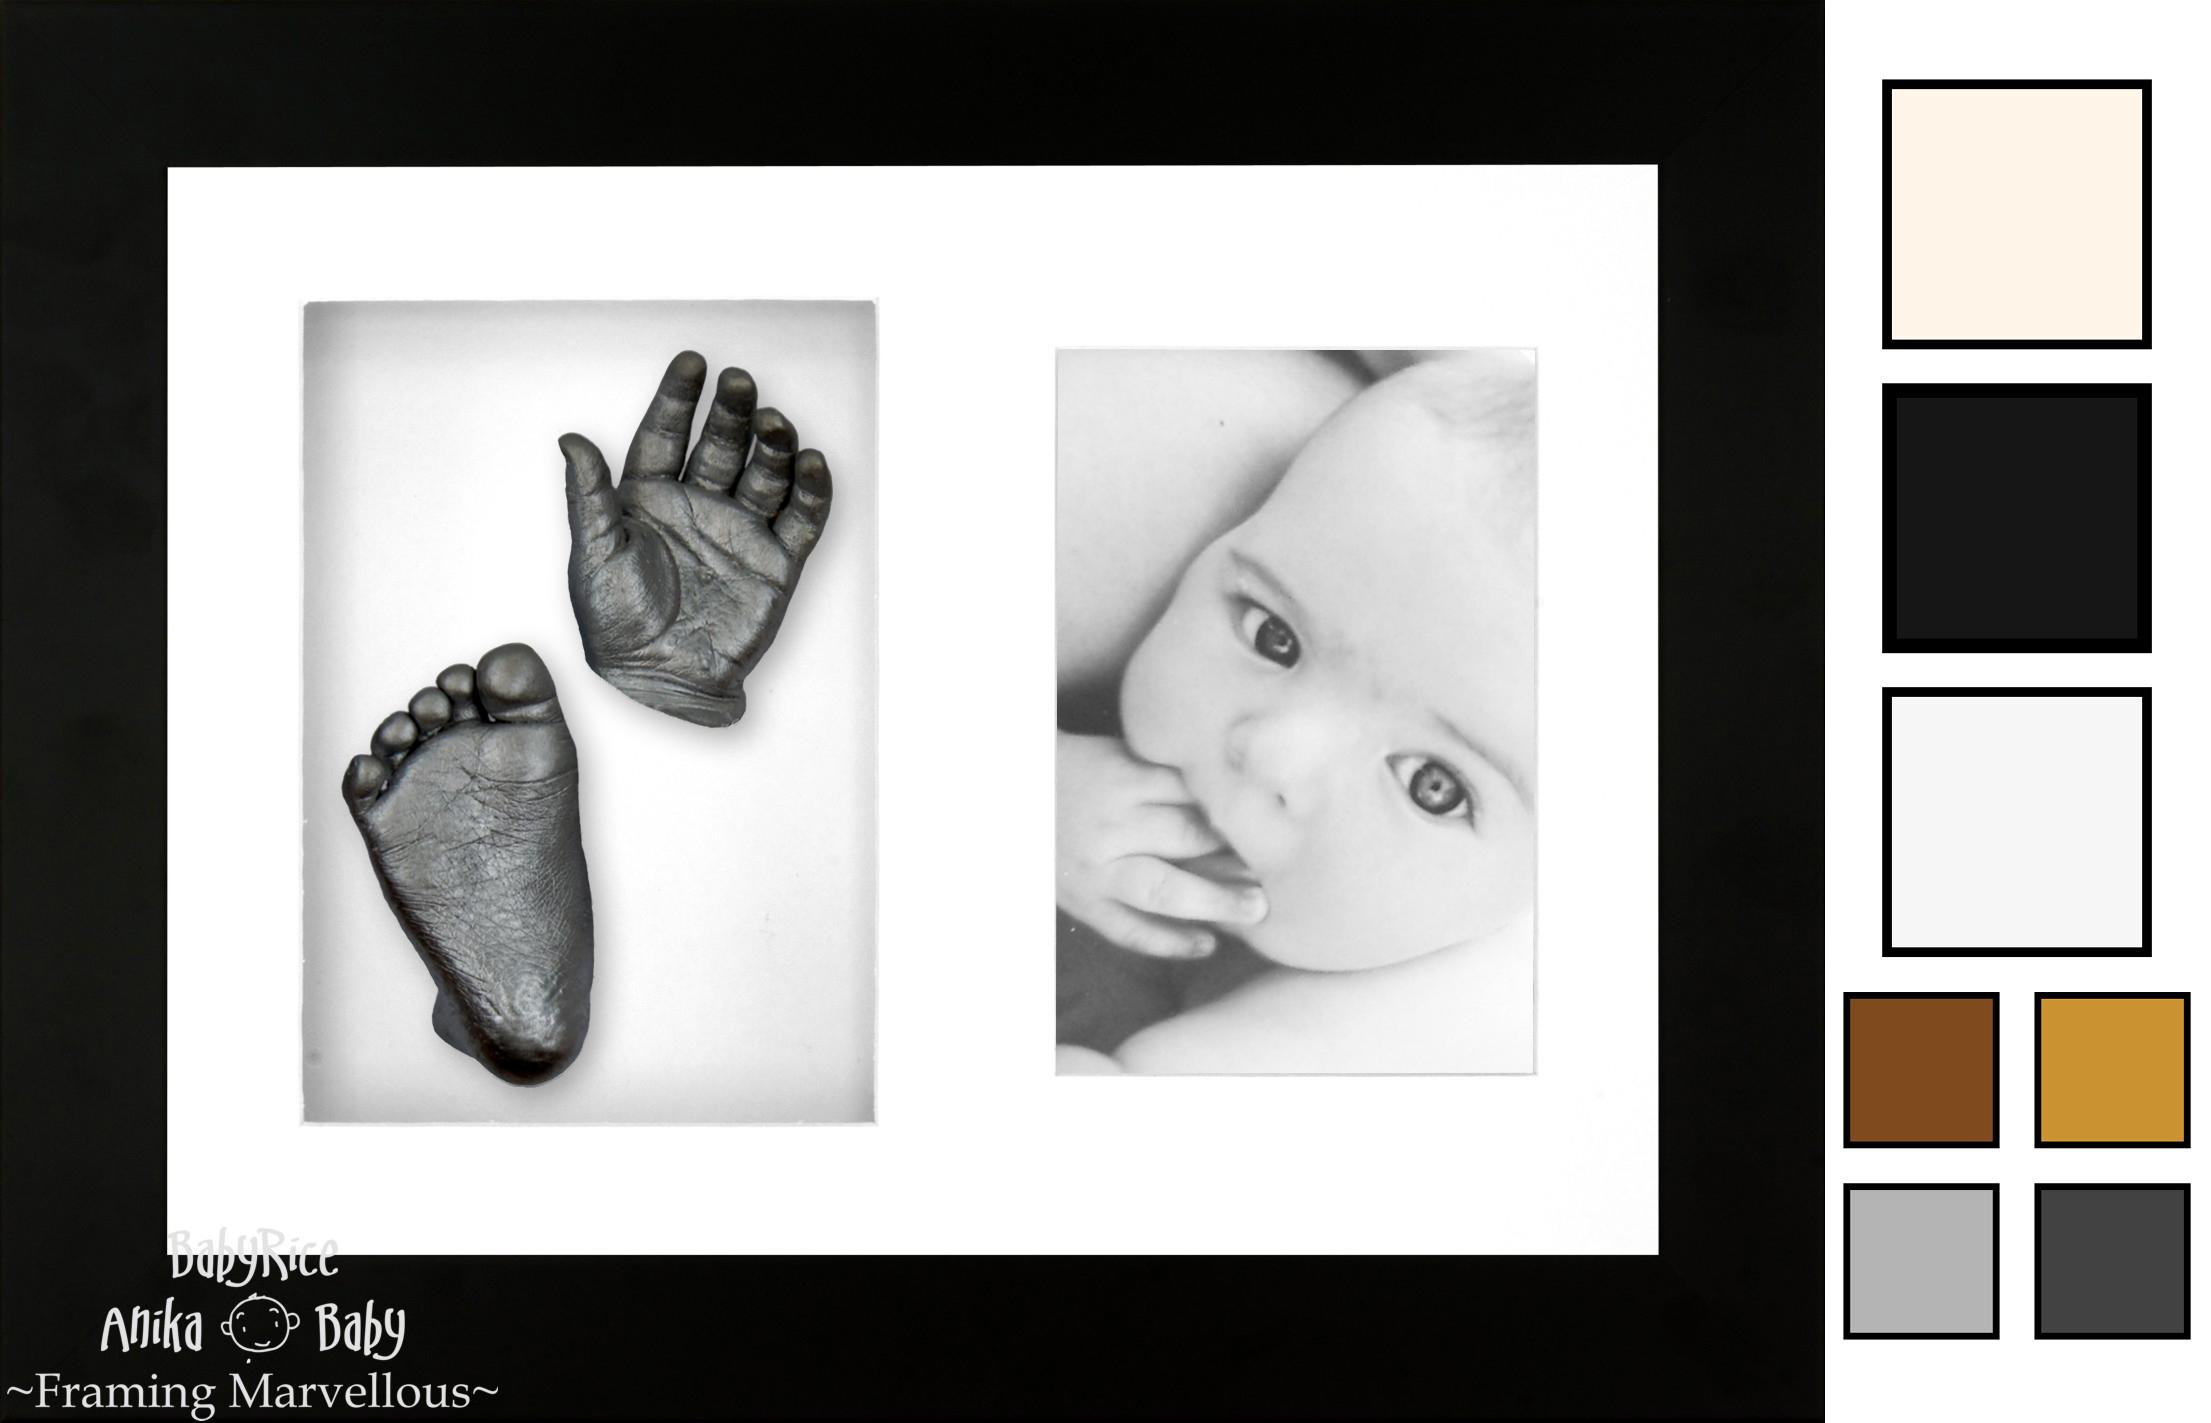 Baby Casting Kit with Black Photo and Casts Display Frame